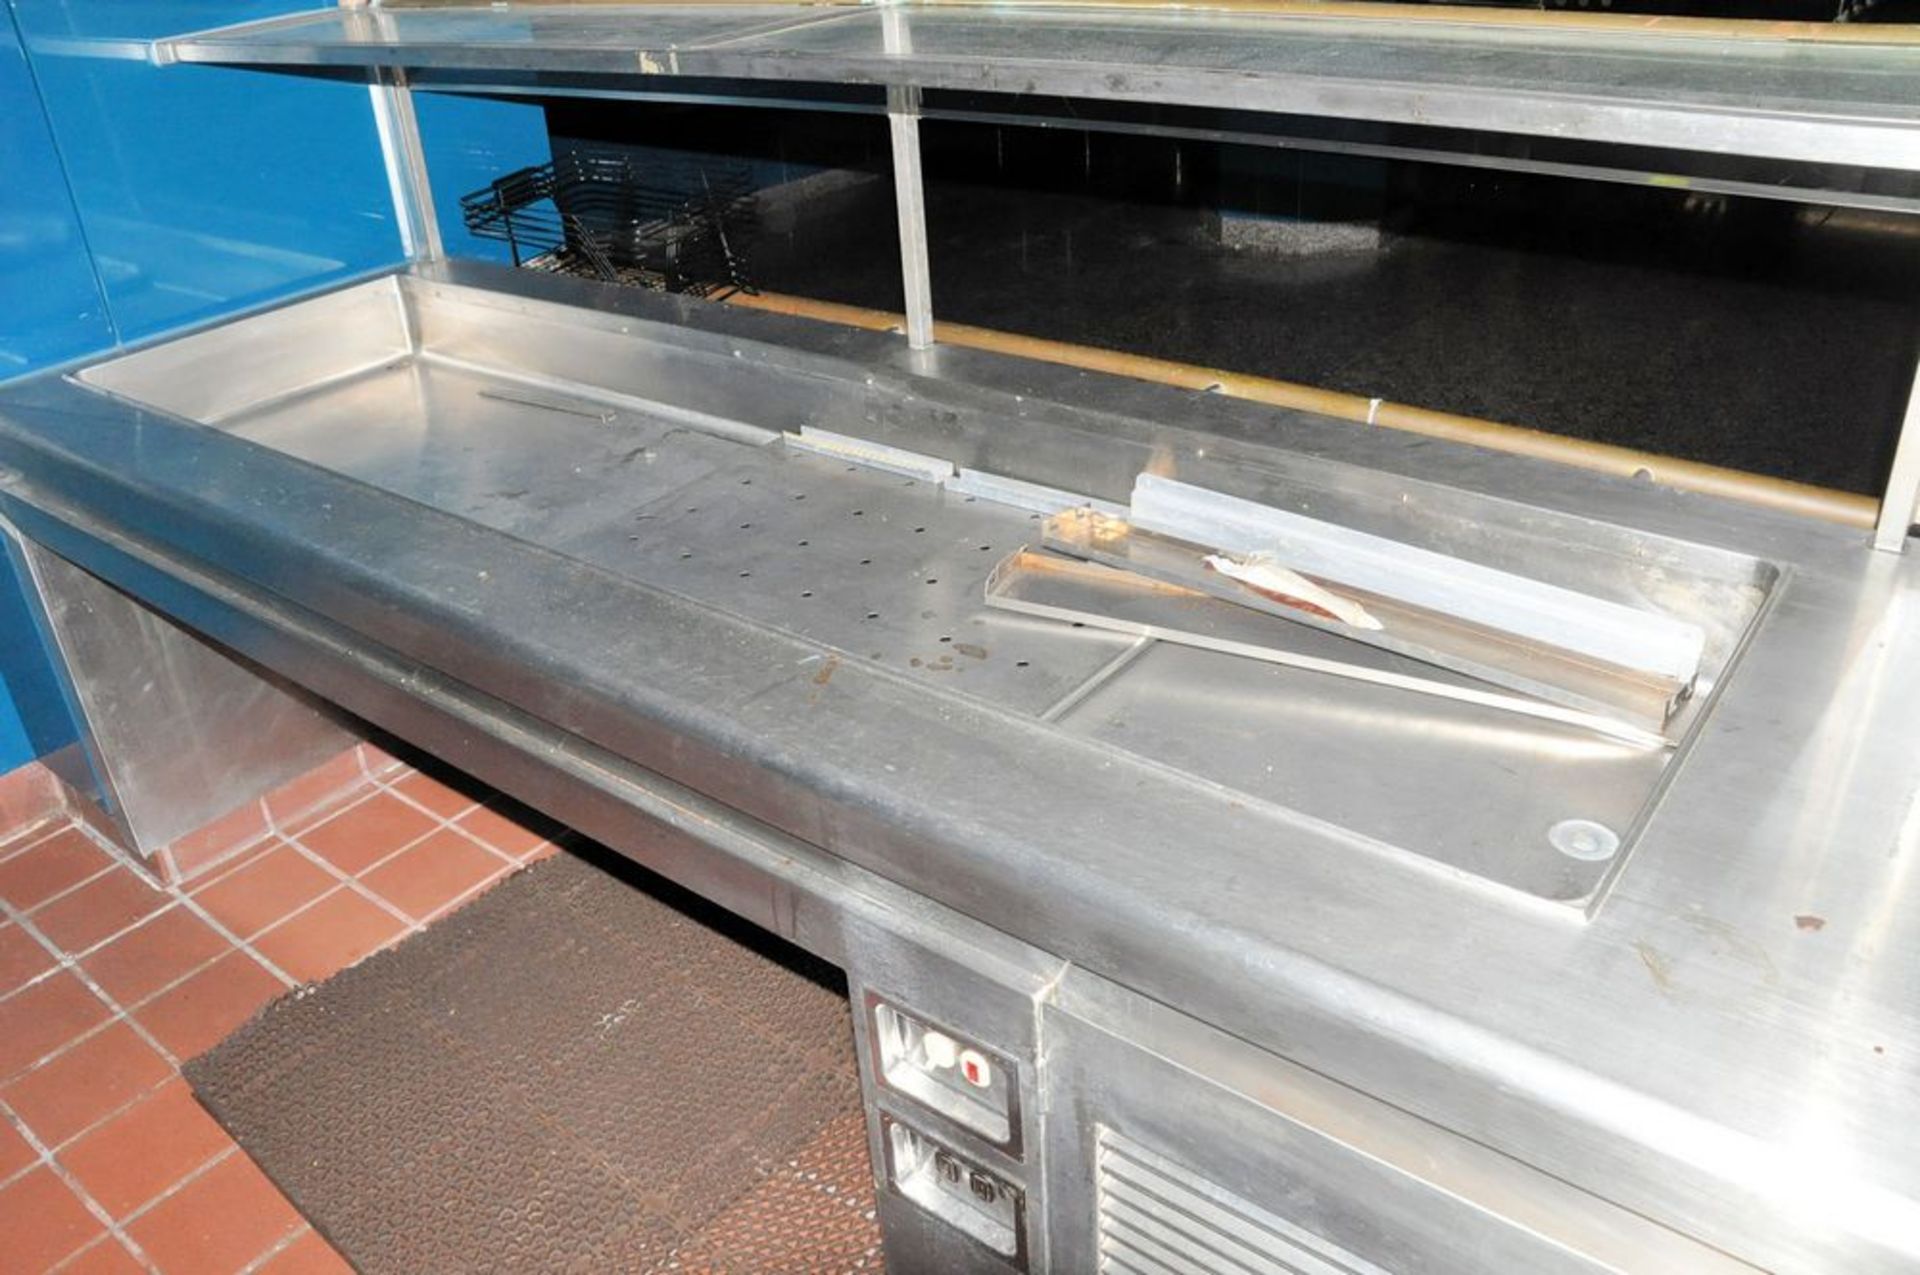 Stainless Steel Cold Sandwich Server Station, 3' x 16', with Overhead Sneeze Guard, (Main Kitchen - Image 3 of 4